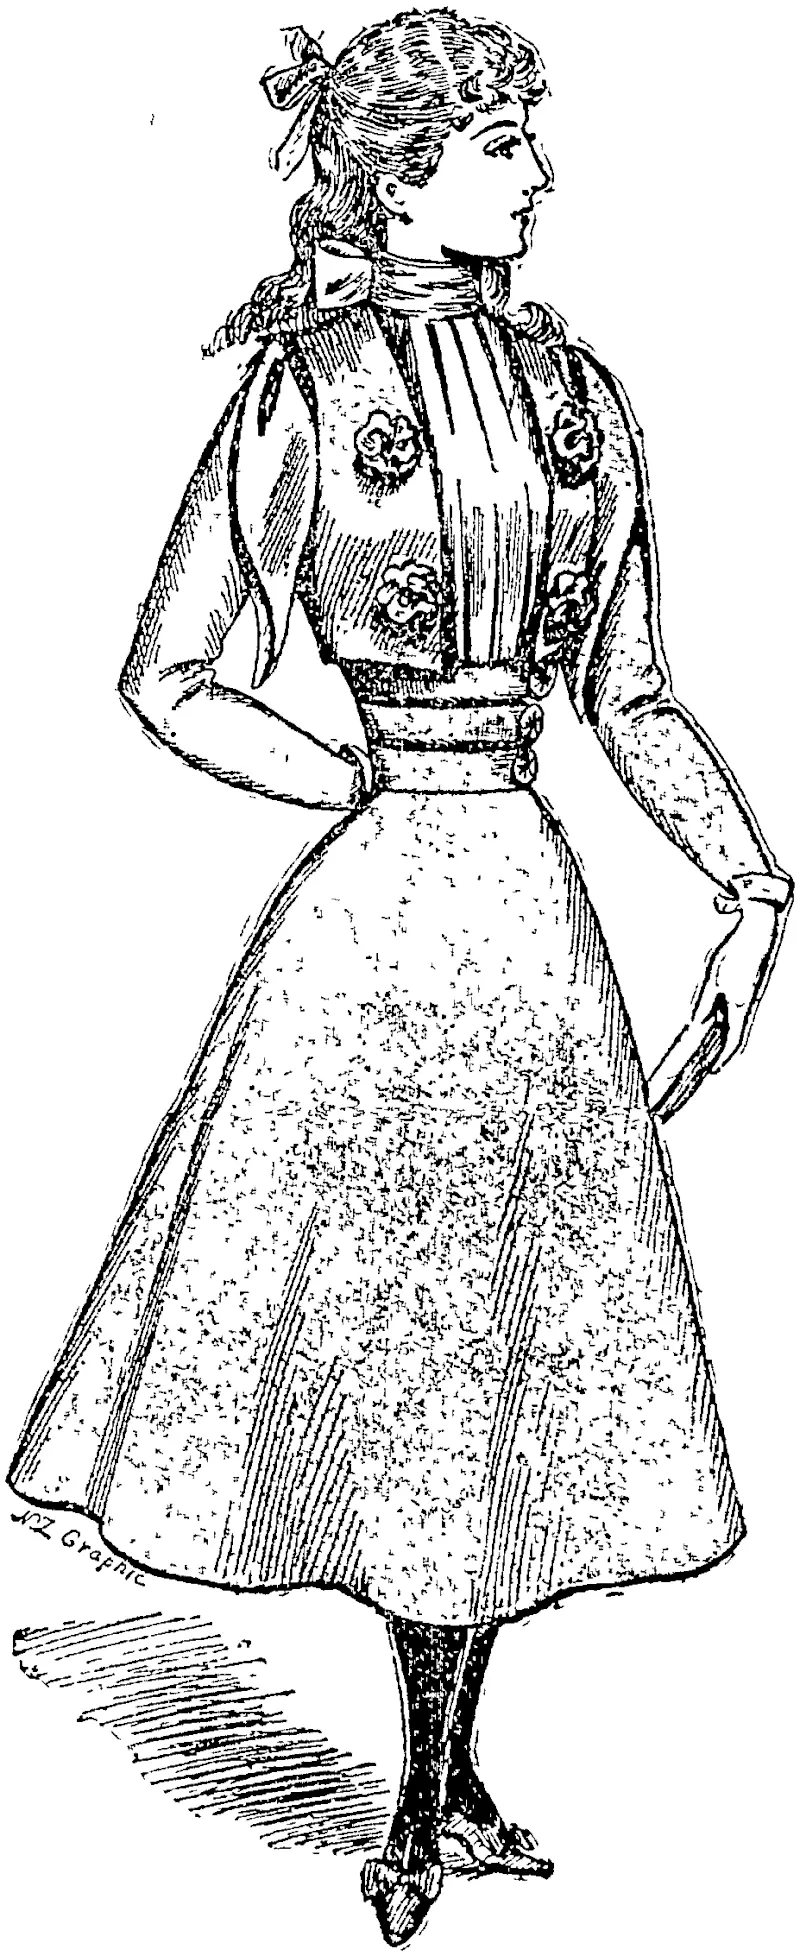 i yOUNG LADY'S .COSTUME. (Auckland Star, 16 September 1899)